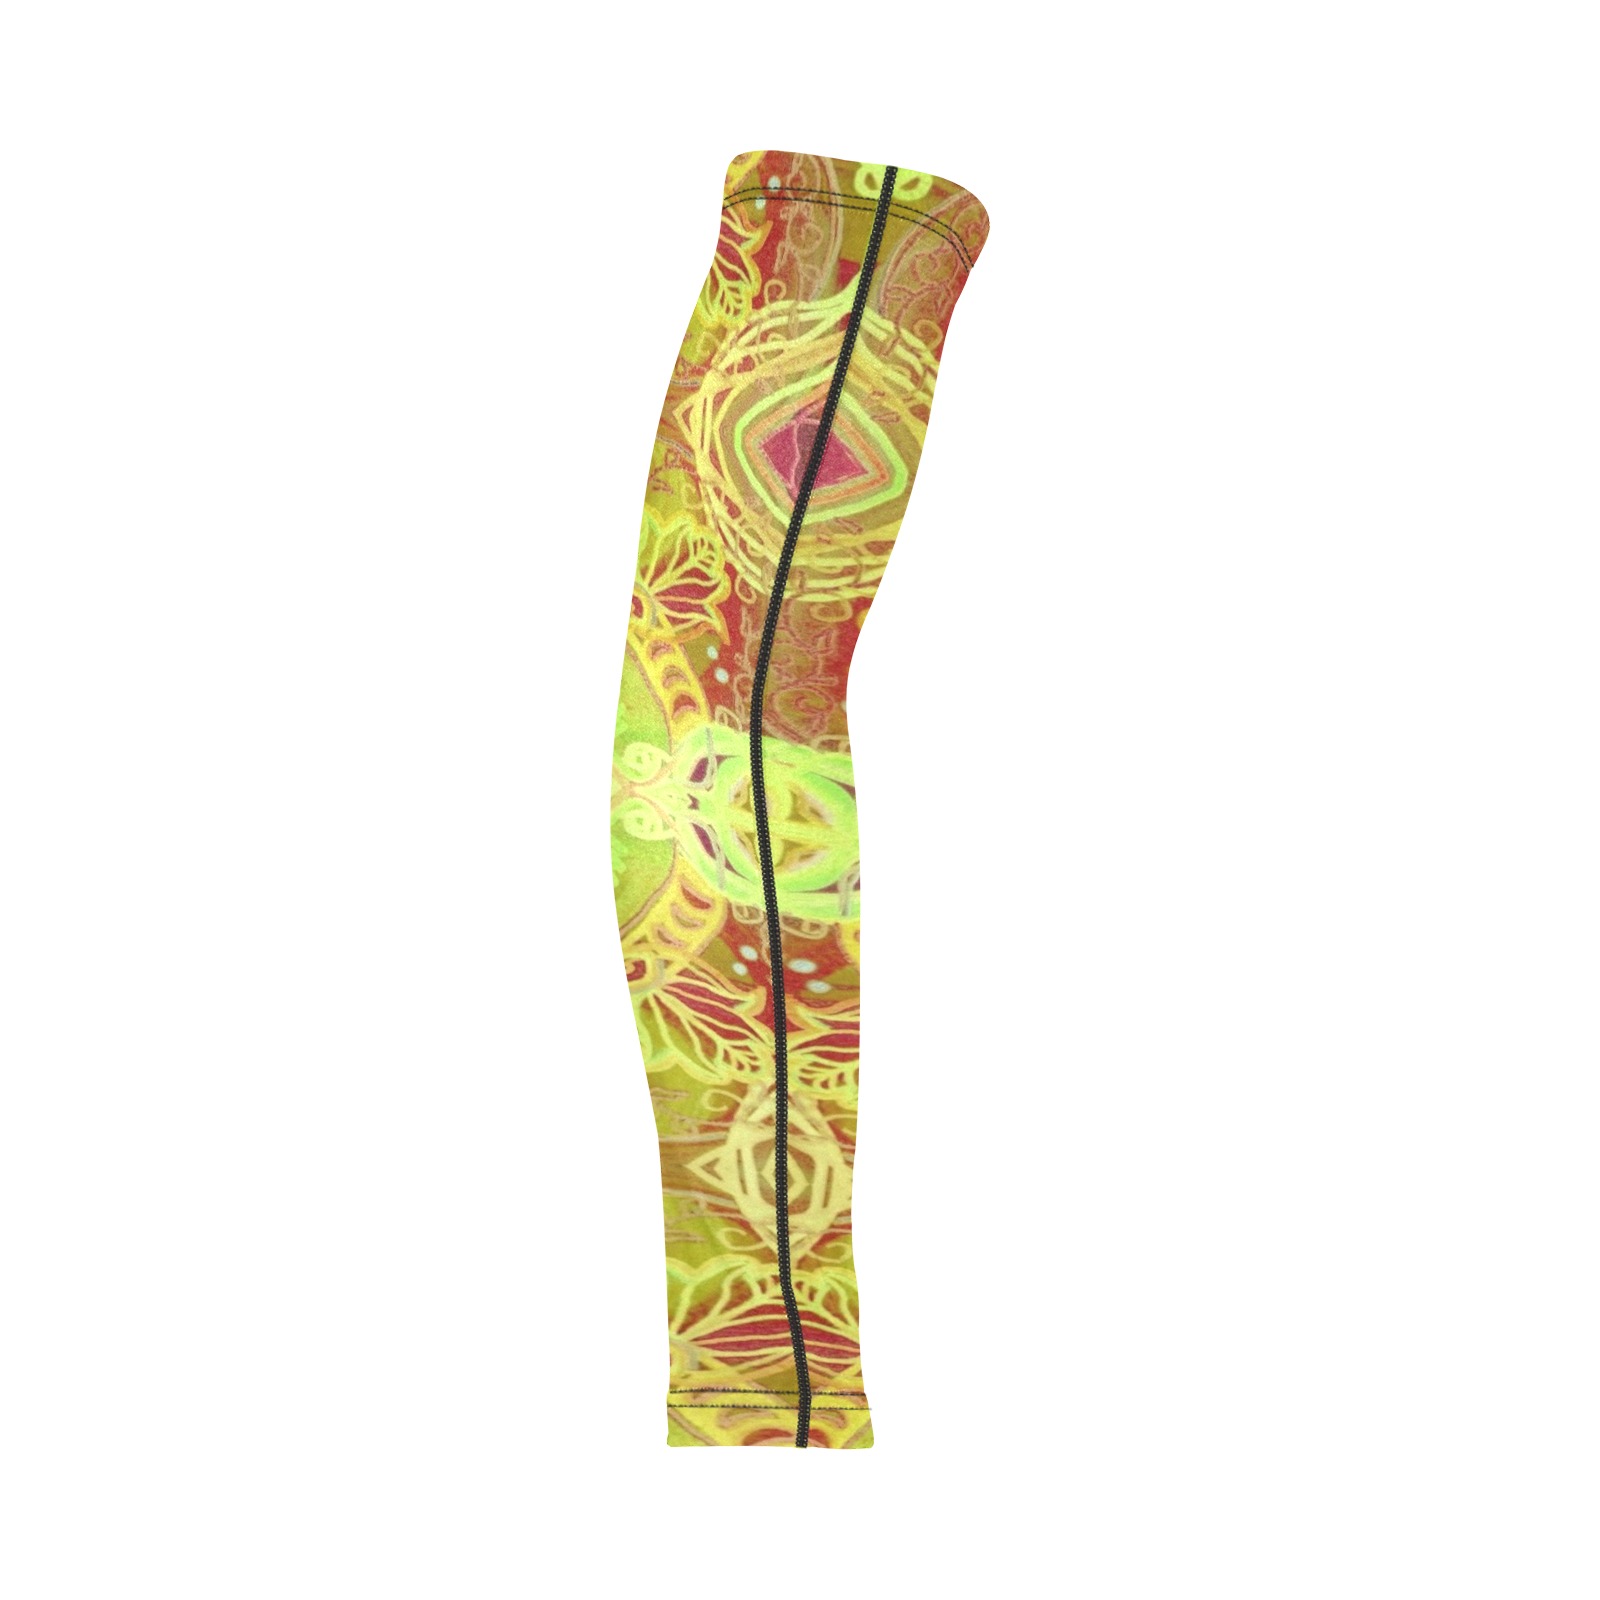 floralie-yellow Arm Sleeves (Set of Two)